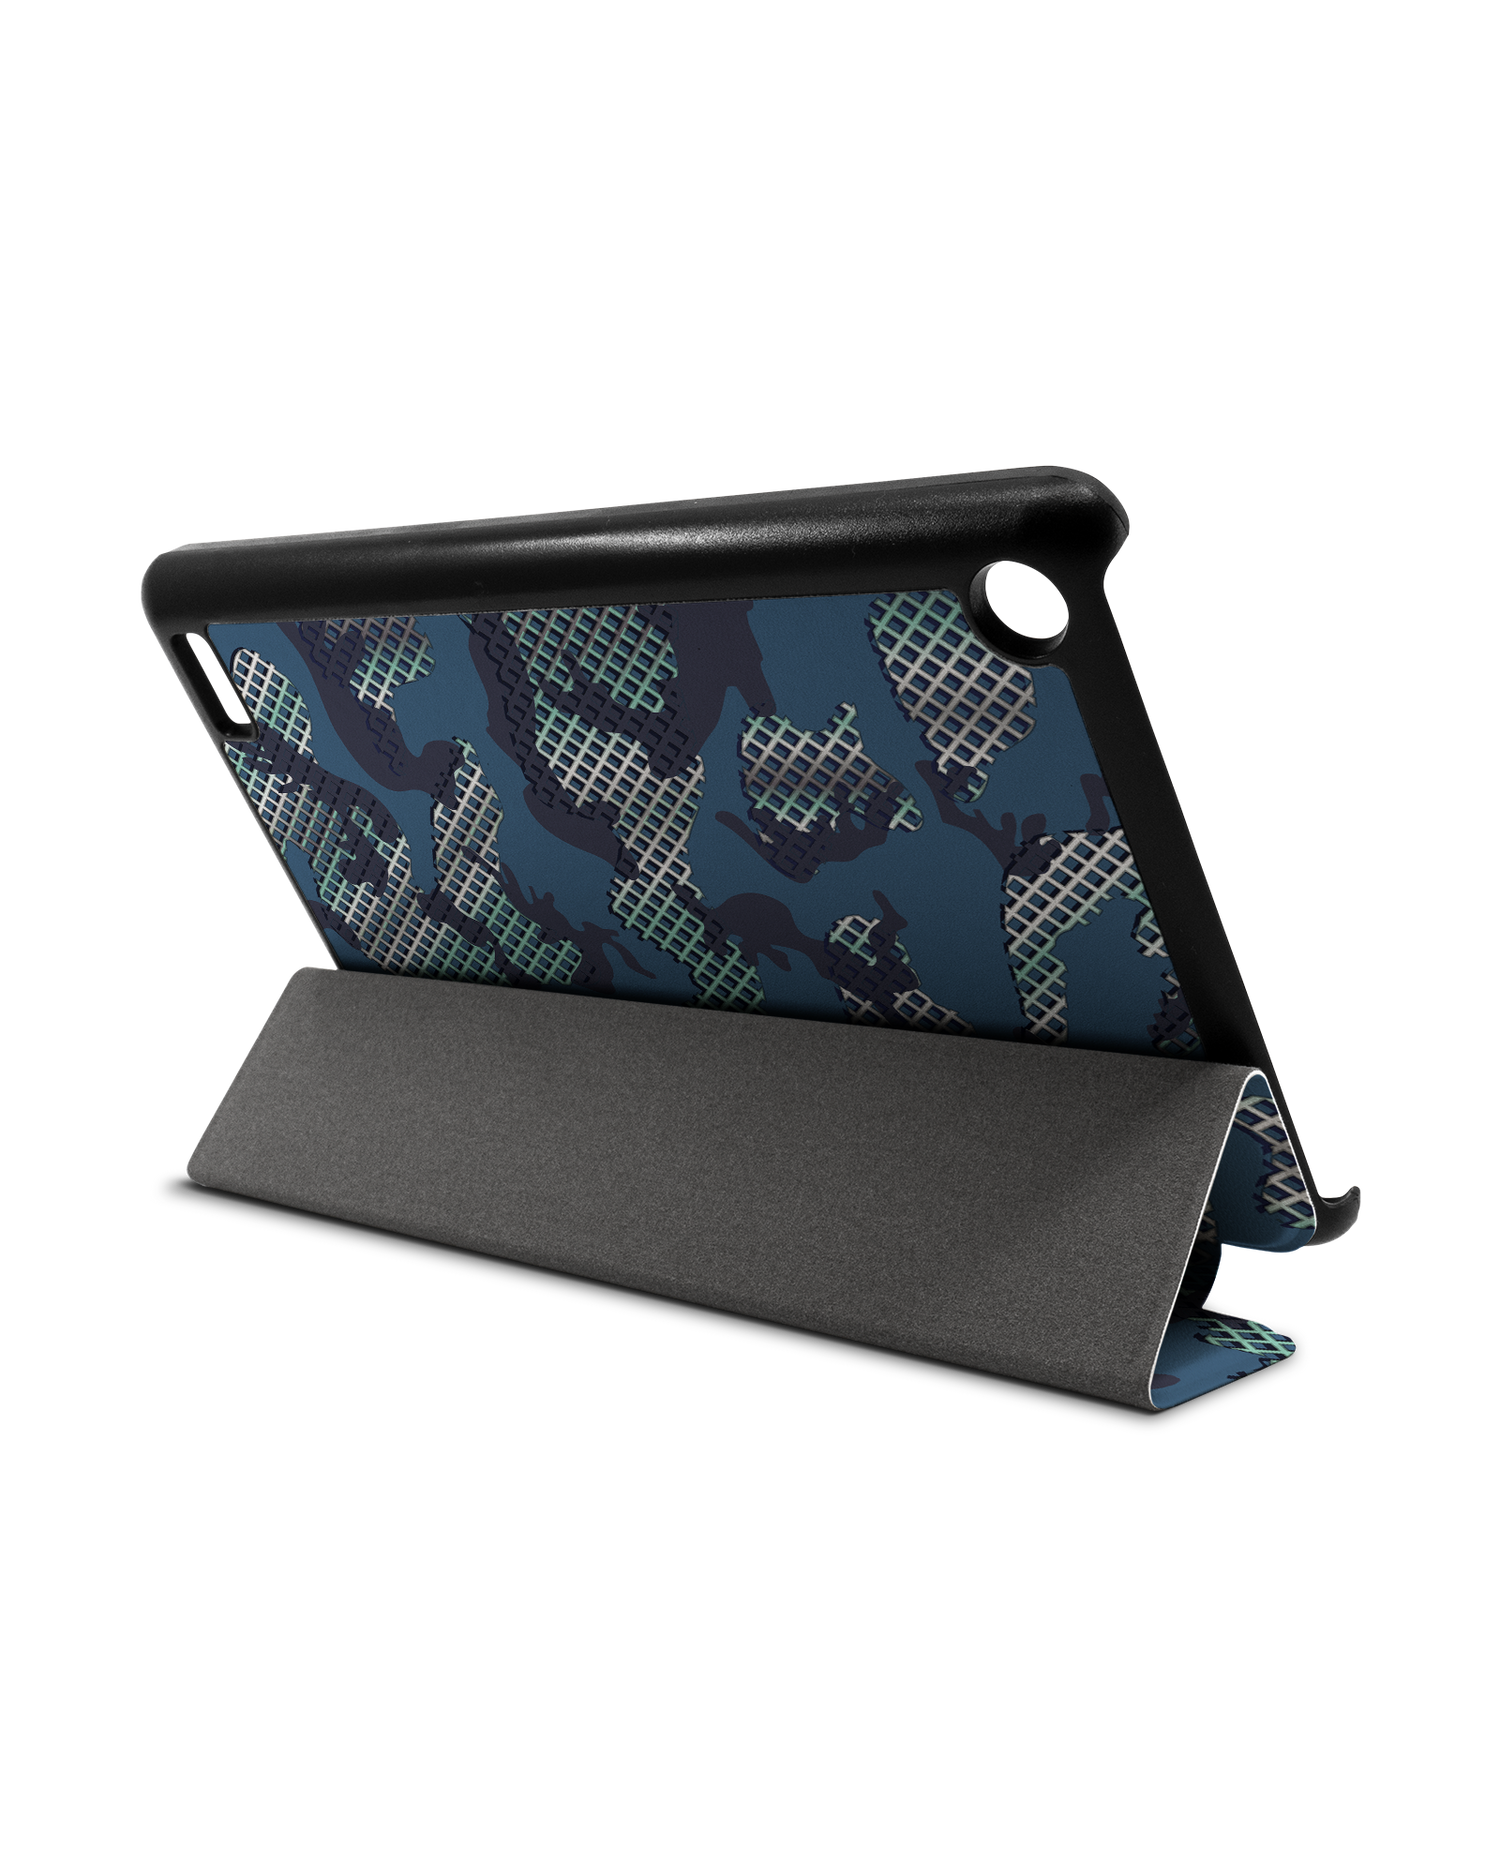 Fall Camo I Tablet Smart Case for Amazon Fire 7: Used as Stand